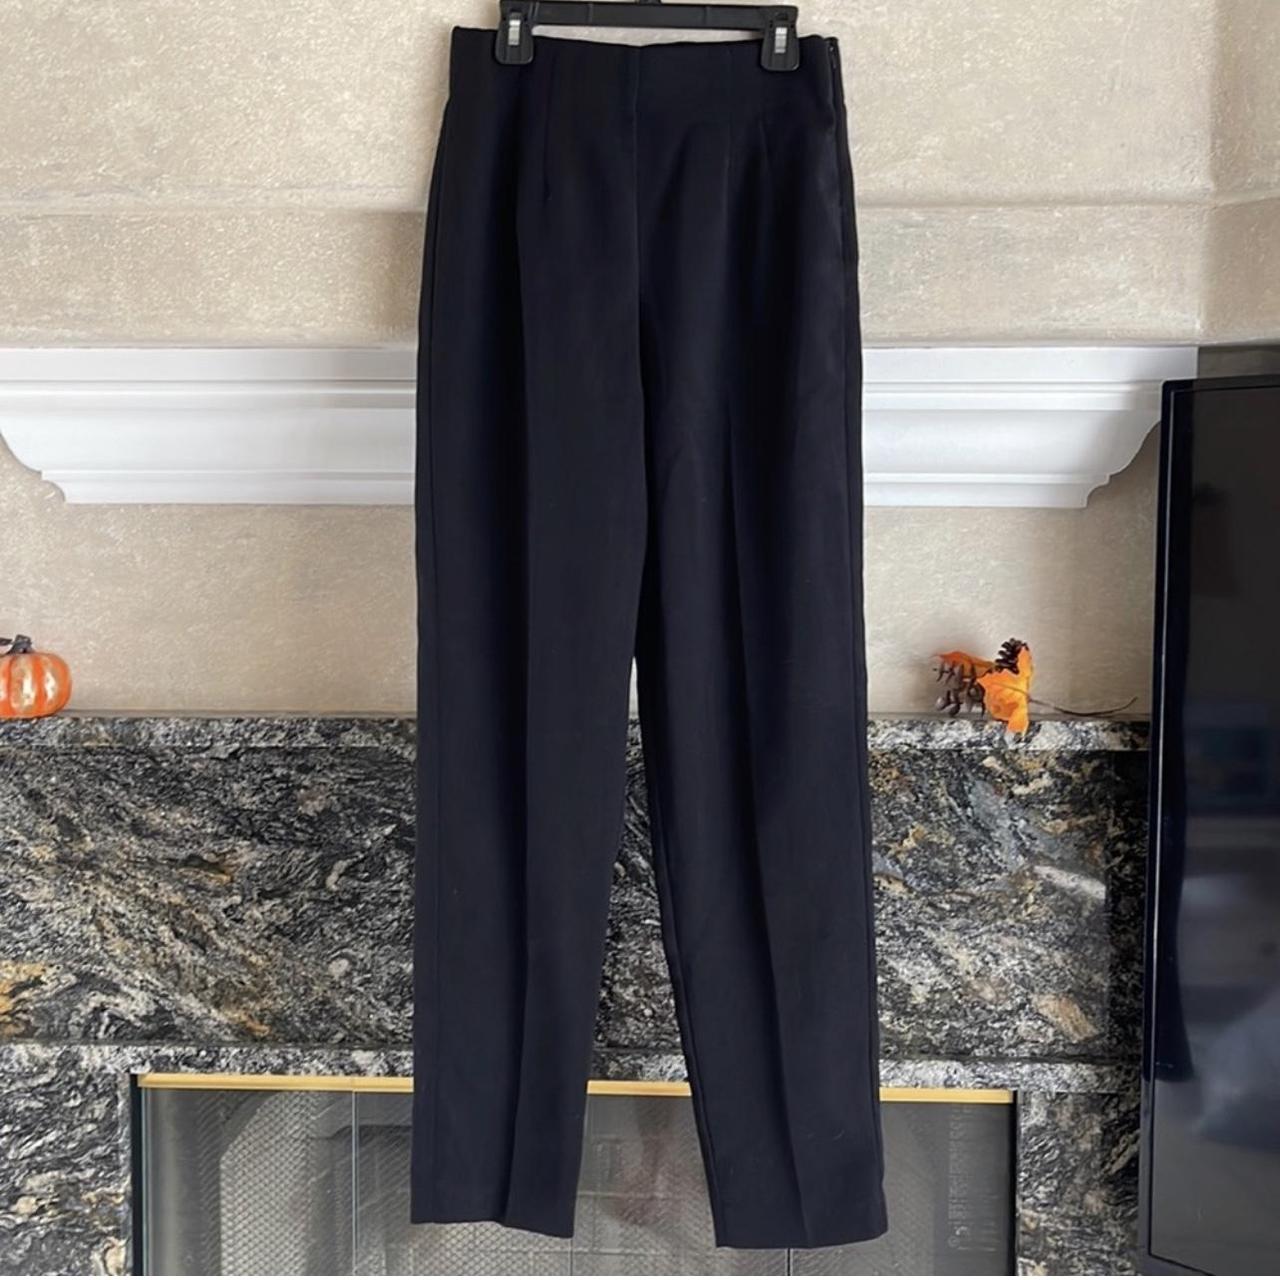 Tailored Tapered Trousers - Black